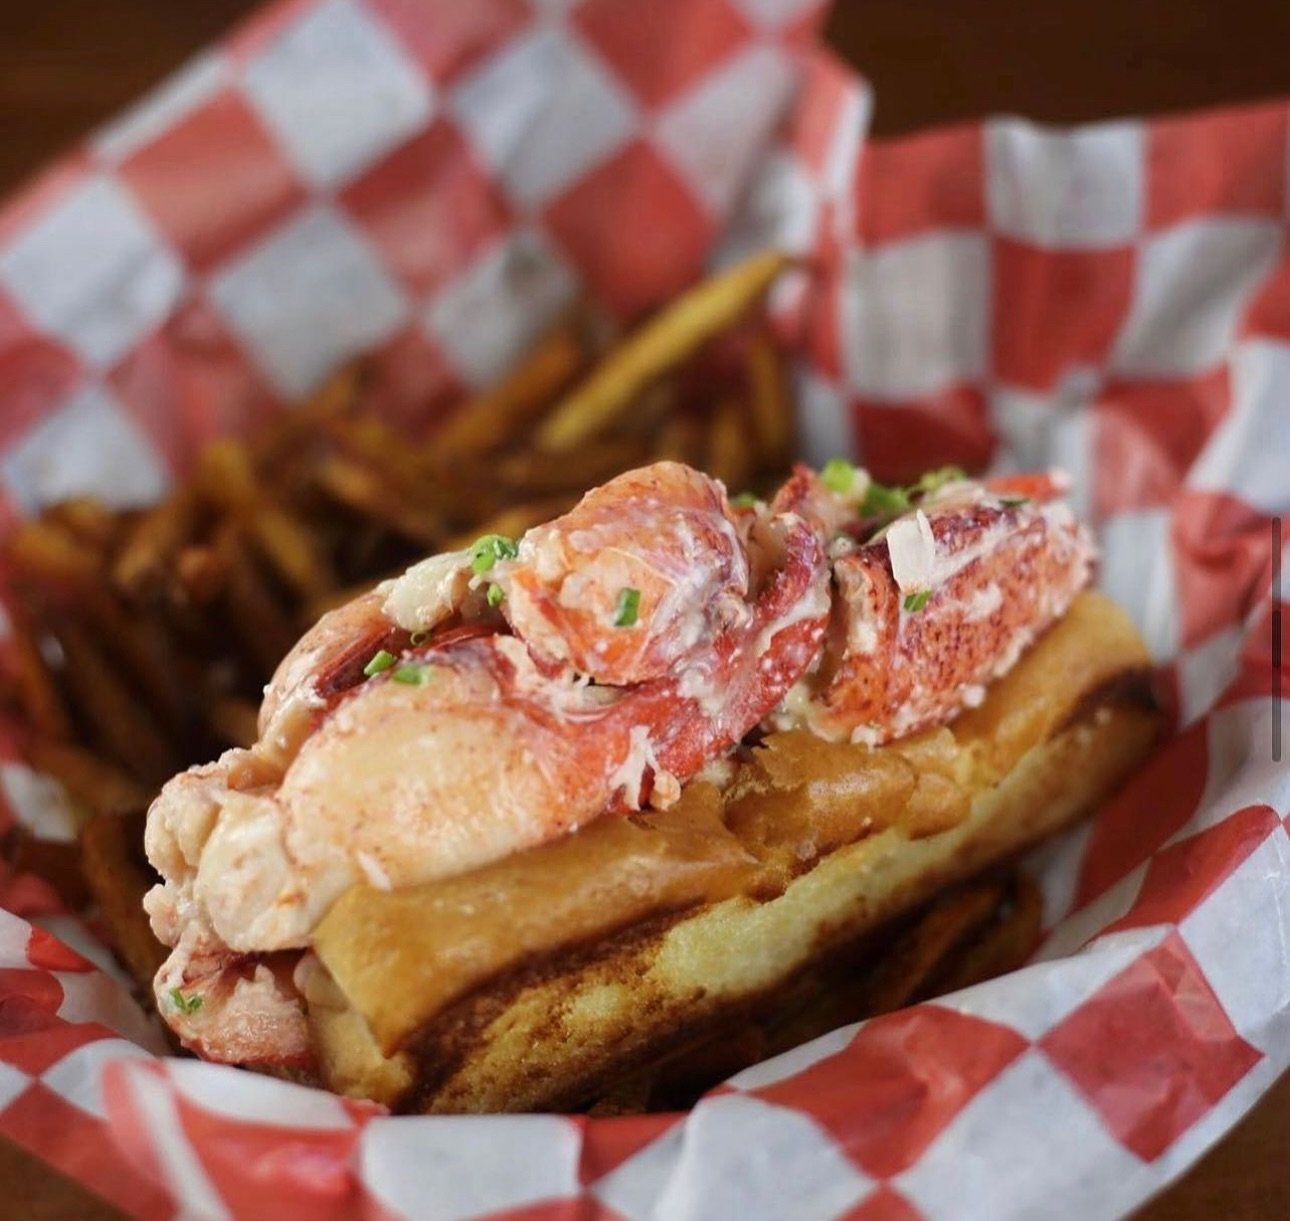 Summer is just around the corner, and lobster rolls are back 🦞🔥☀️

Available for pickup and delivery via Grubhub or Door Dash 🚗

Maine Lobster With Mayo, Melted Butter &amp; Chives On A New England Bun, Old Bay Fries

#inwood #inwoodnyc #uptown #u